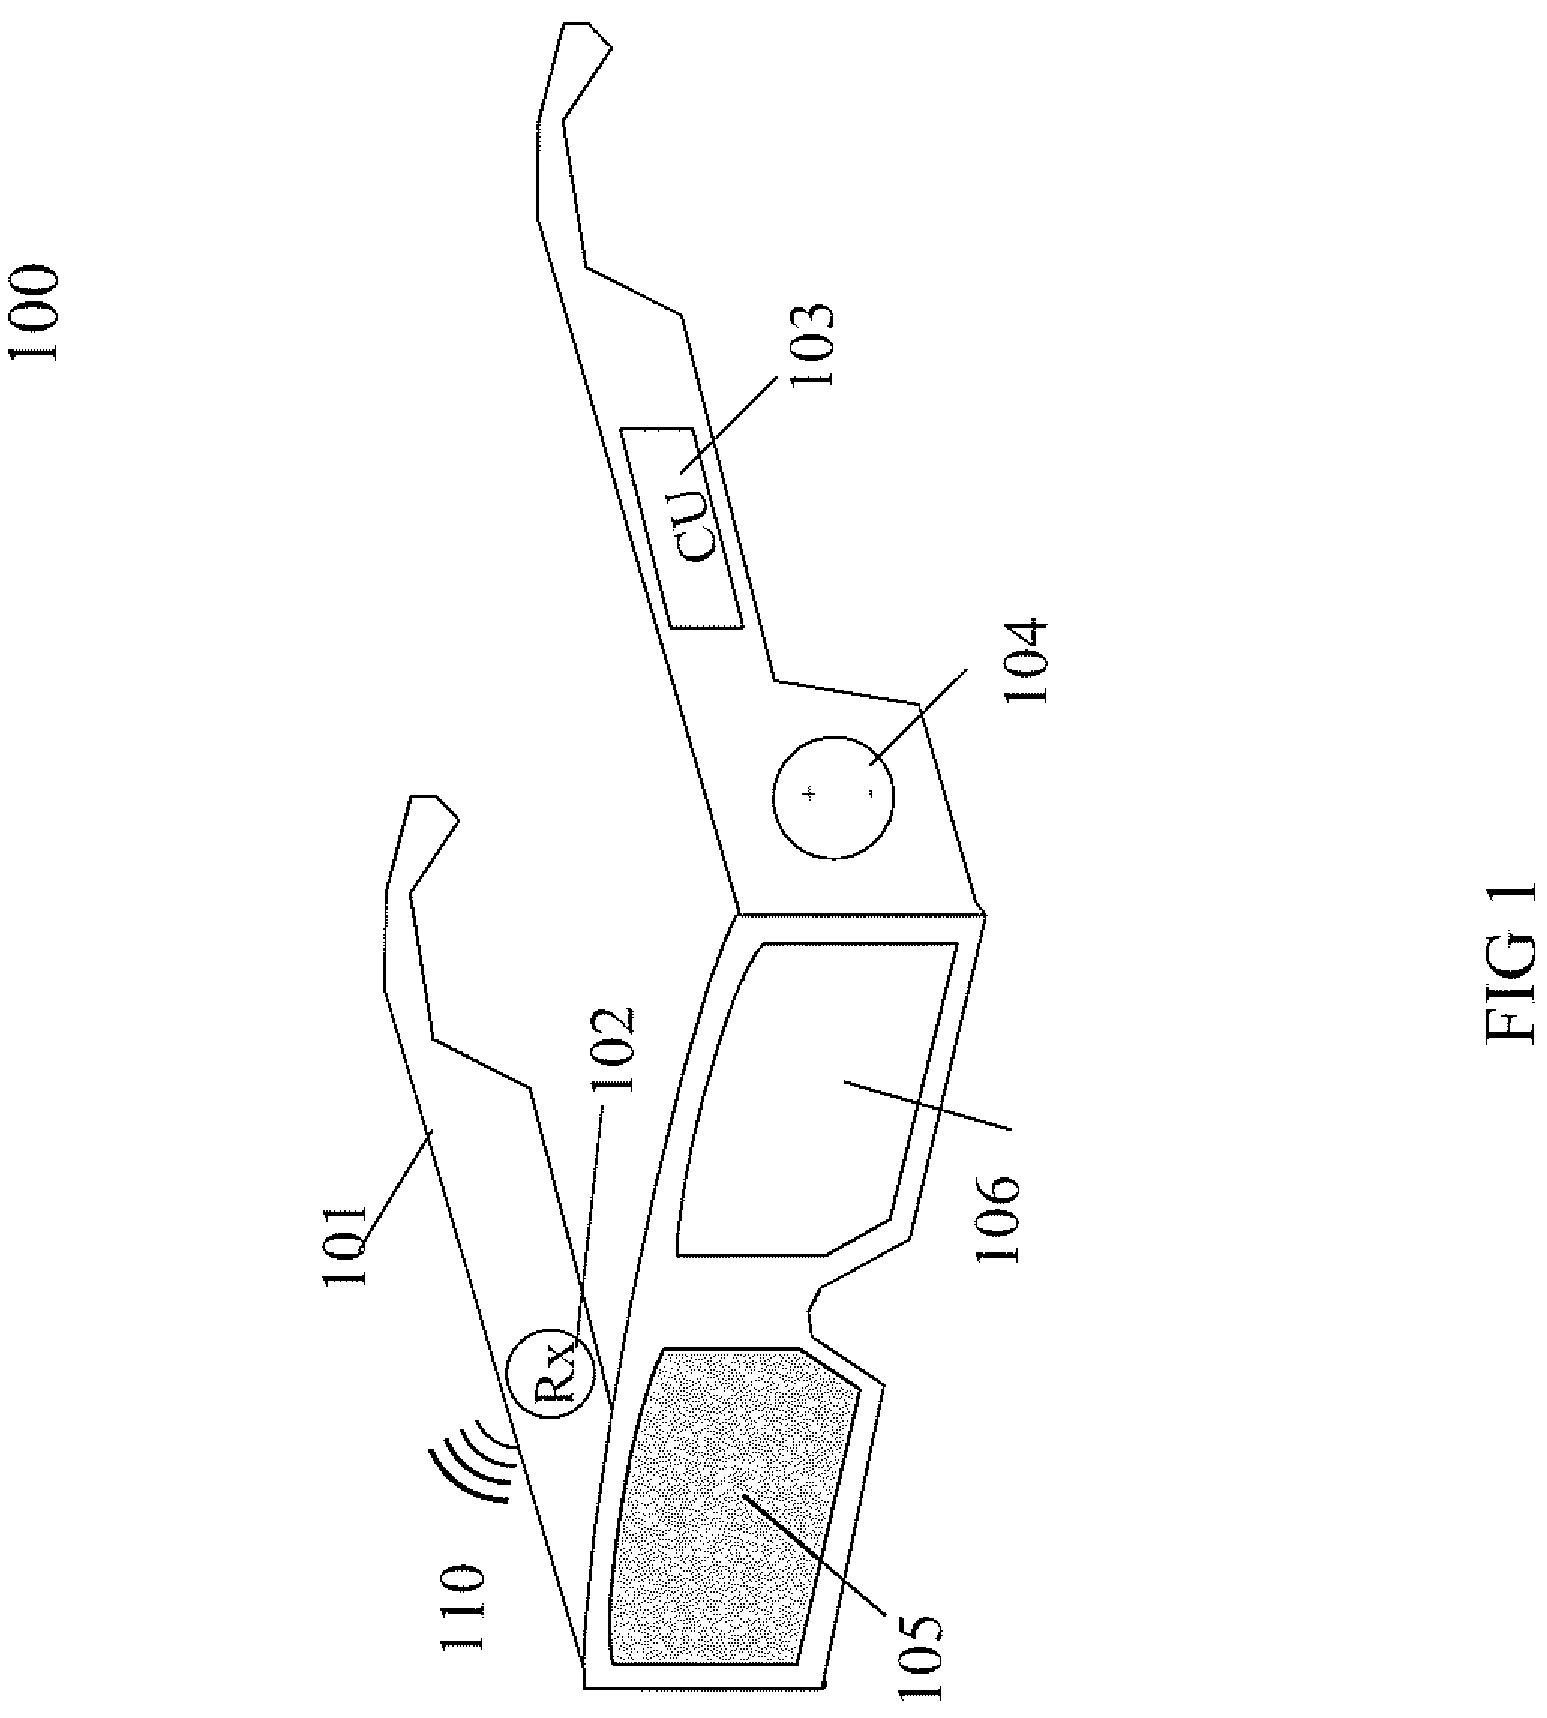 Continuous adjustable 3deeps filter spectacles for optimized 3deeps stereoscopic viewing and its control method and means